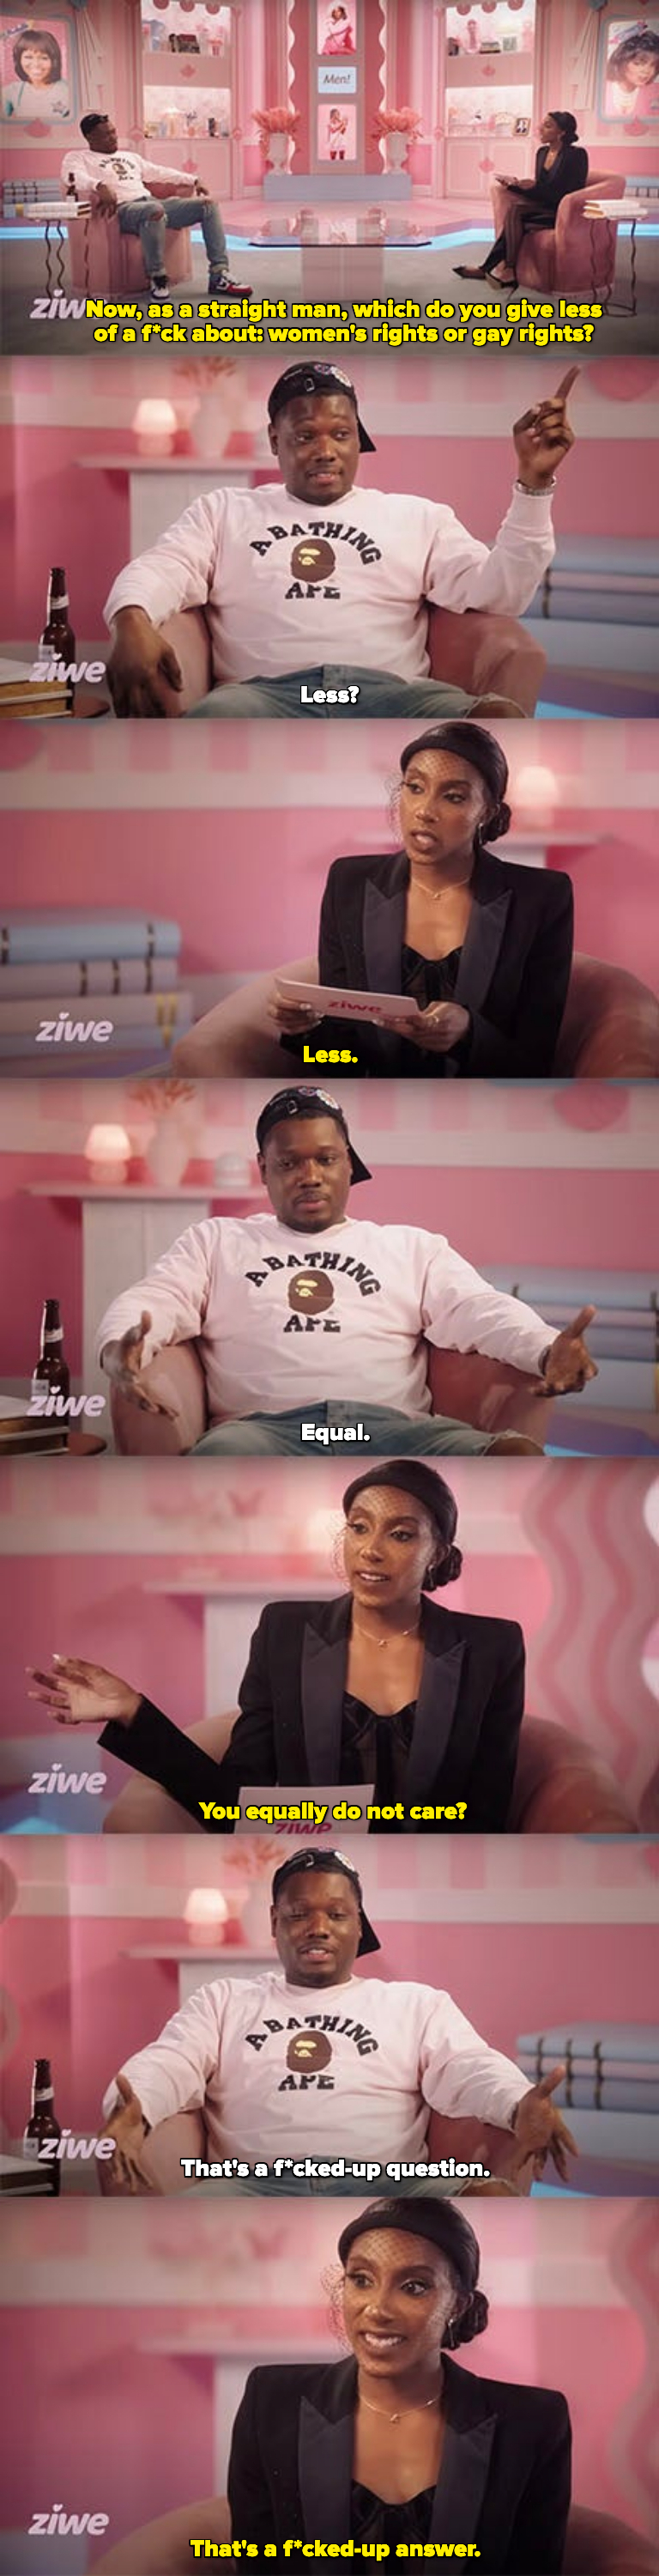 Ziwe interviewing Michael Che on her show